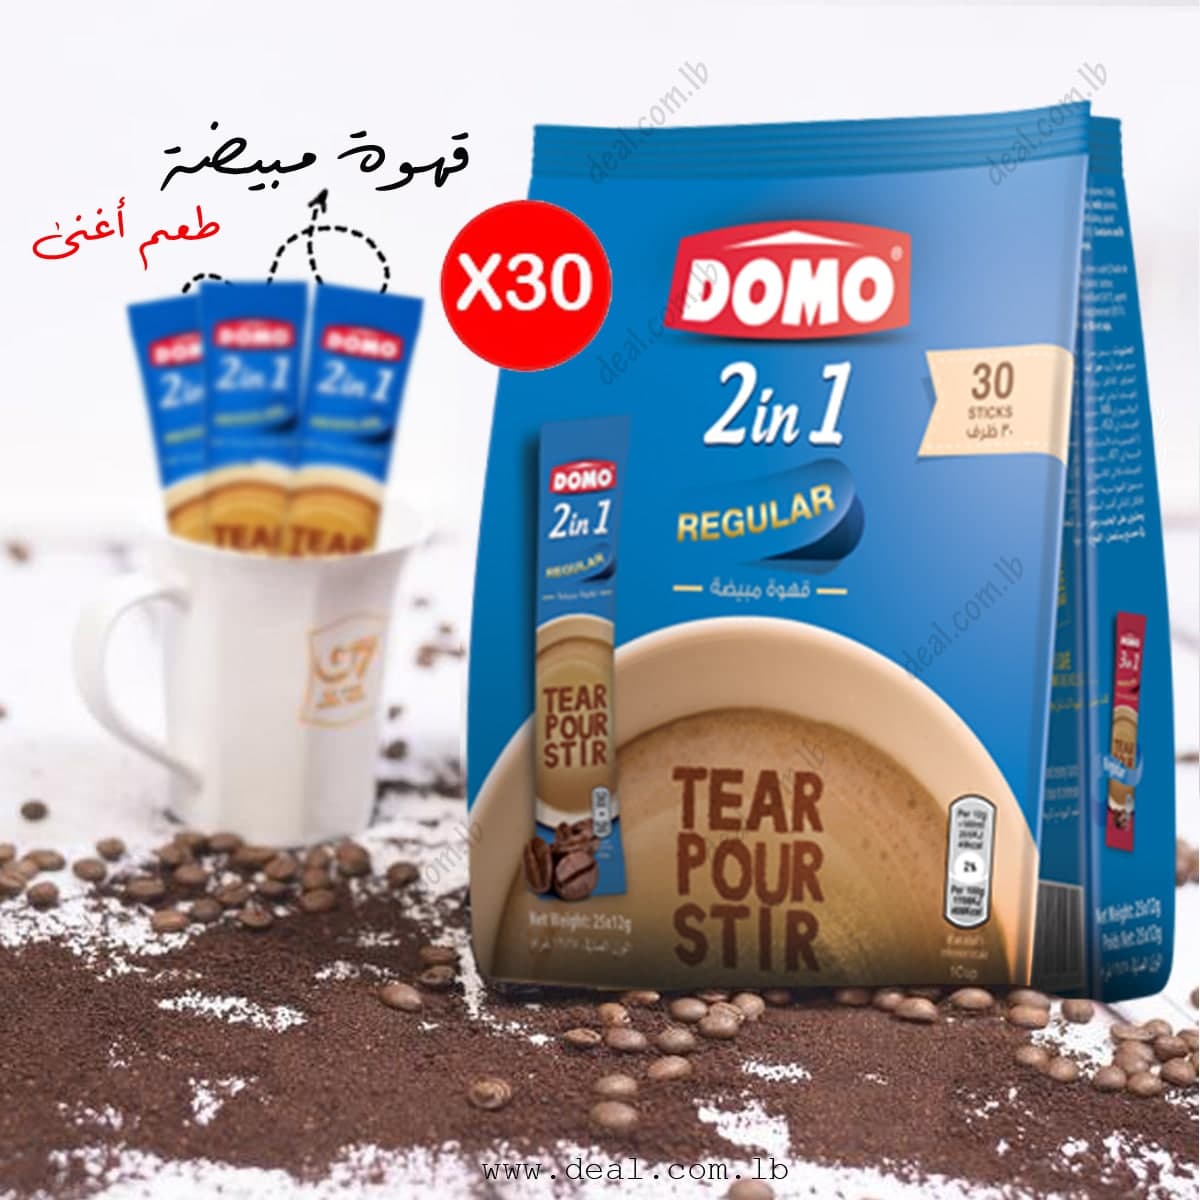 DOMO INSTANT COFFEE 2 IN 1 30pcs 12G